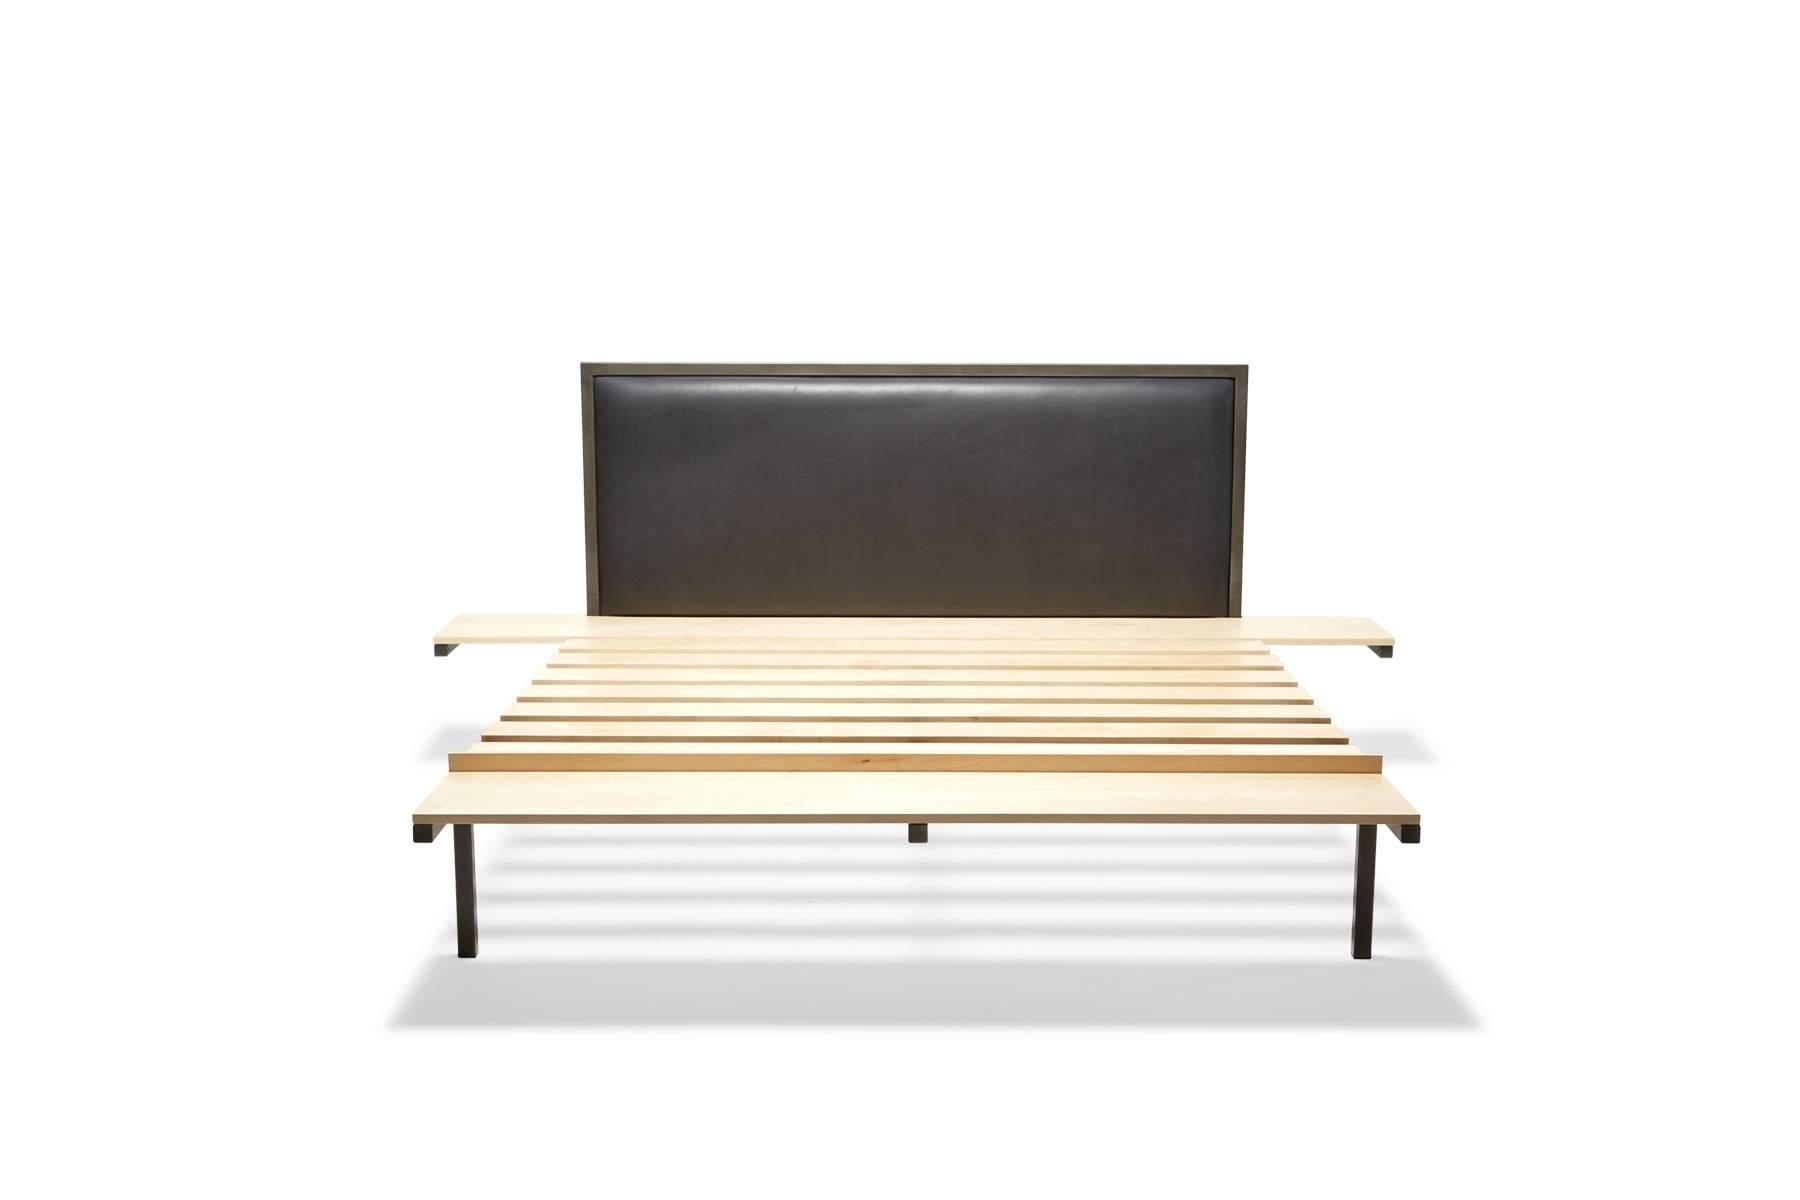 New for Stephen Kenn in 2016 is the Inheritance bed. The frame is tube steel in blackened steel, with a smoky blue leather headboard and Maple side table, bench and slats. The side tables and bench are integrated into the frame of the bed, creating